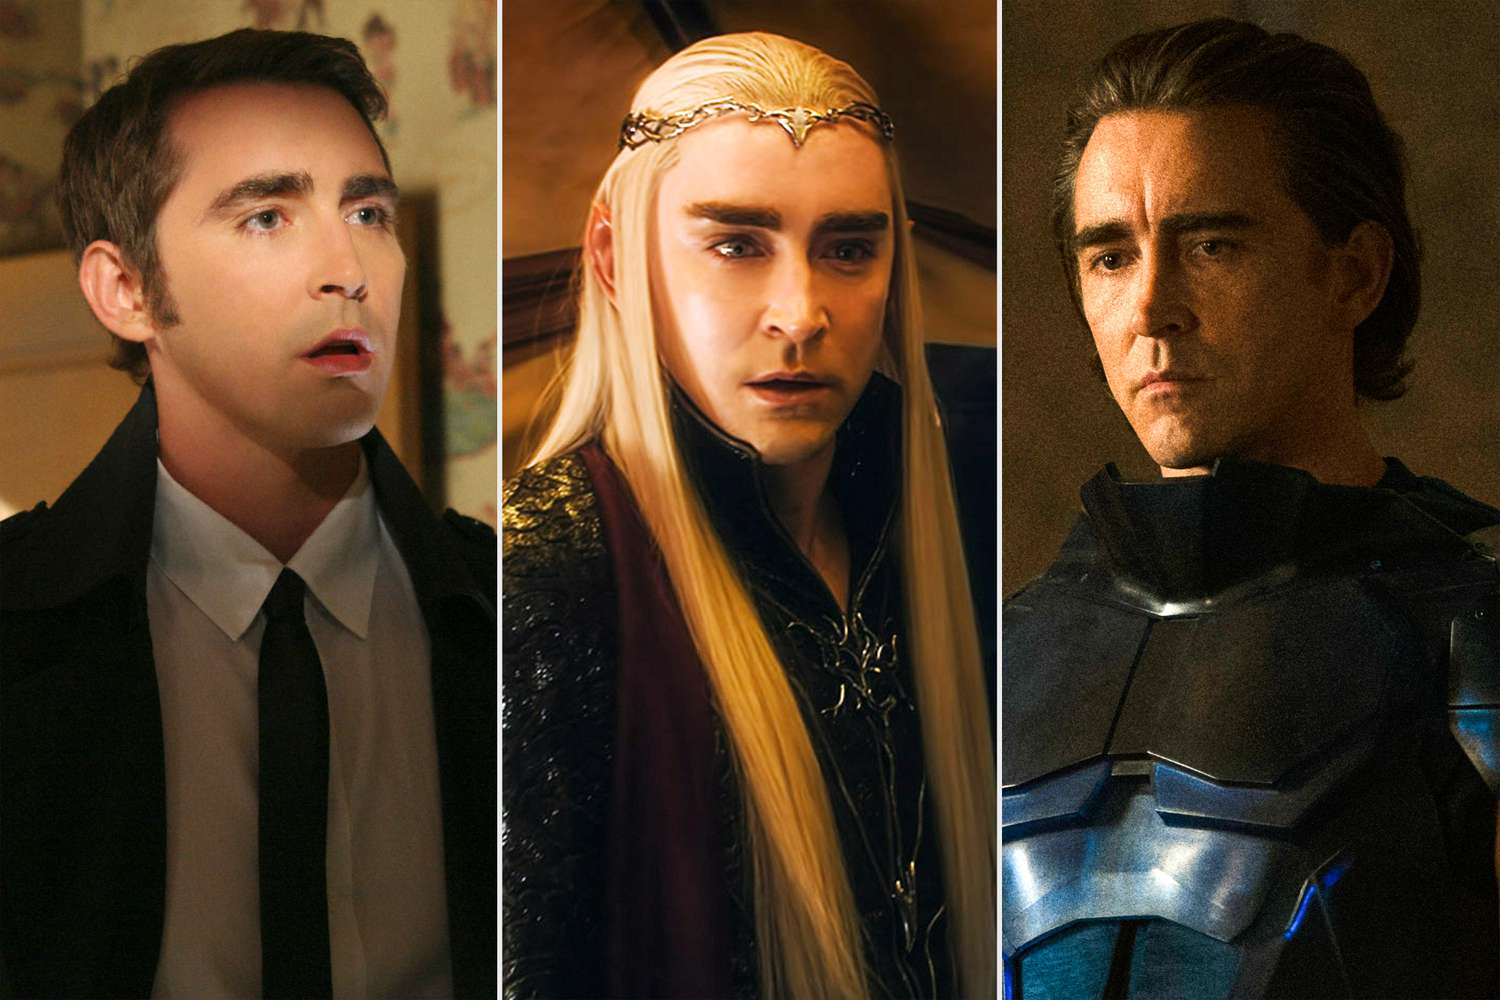 Lee Pace Role Call Pushing Daisies, The Hobbit, and Foundation